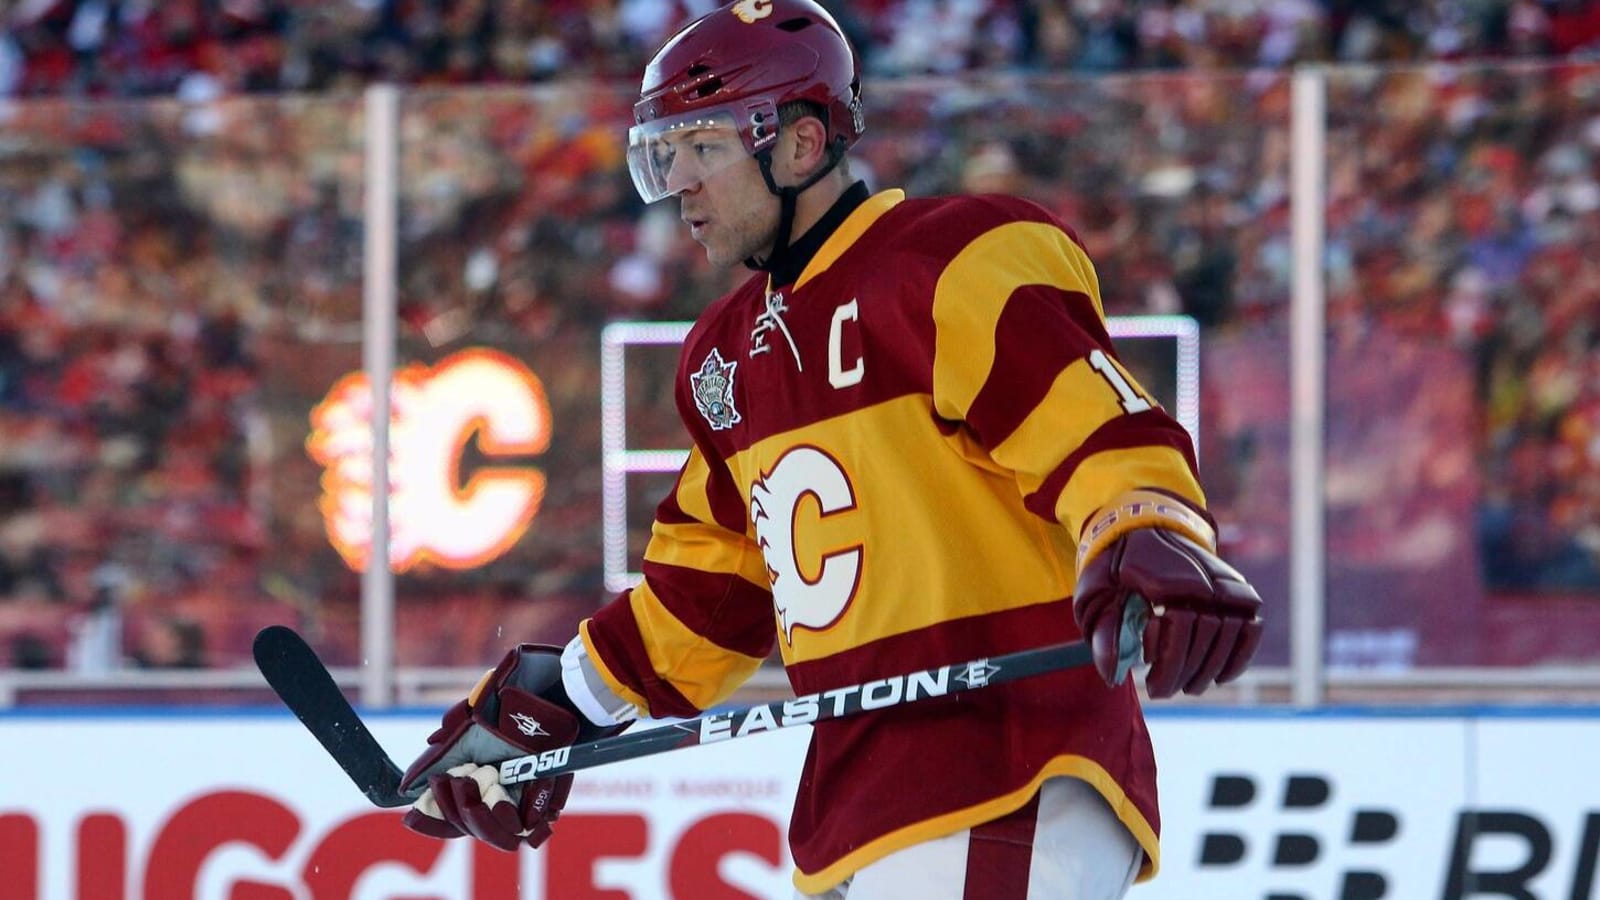 Jarome Iginla joins Calgary Flames as special advisor to the general manager